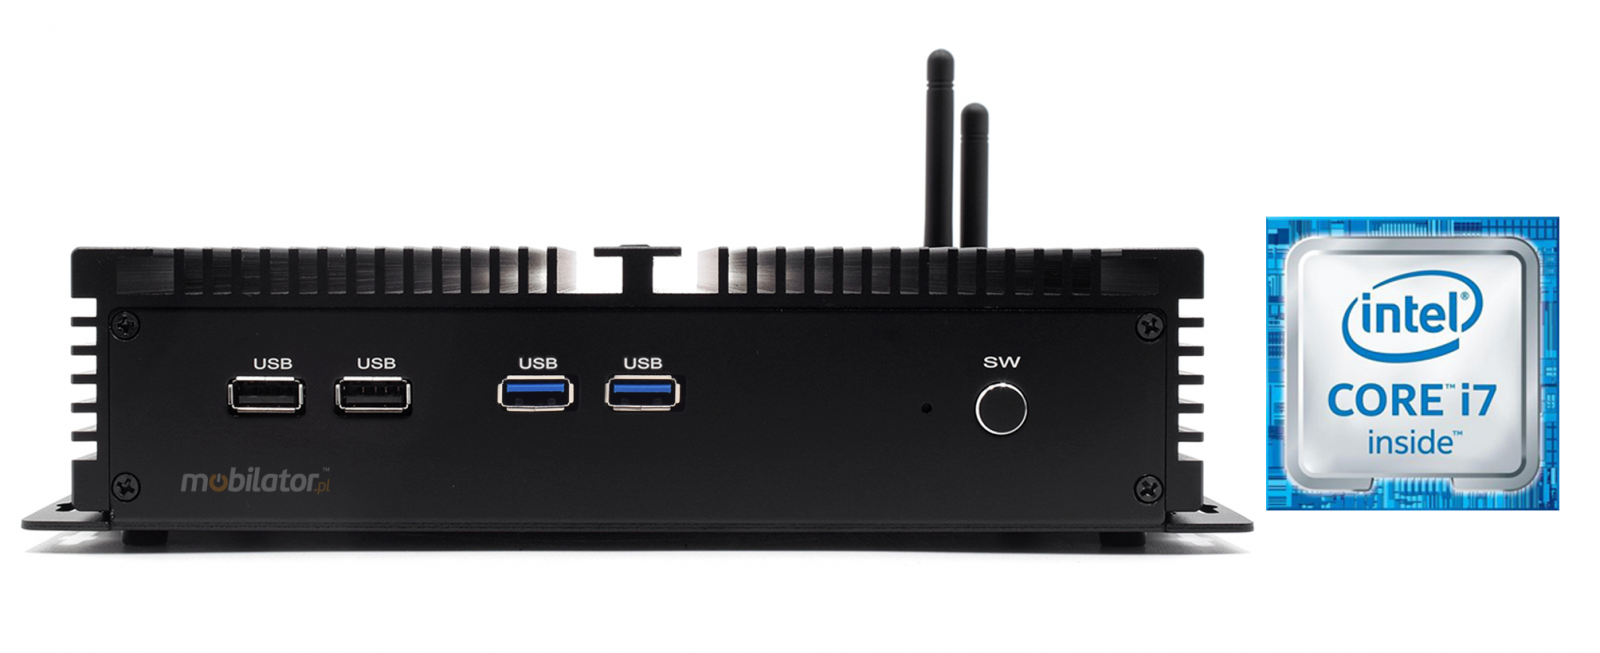 HyBOX K4 Intel Celeron a small reliable and fast mini pc with a powerful processor